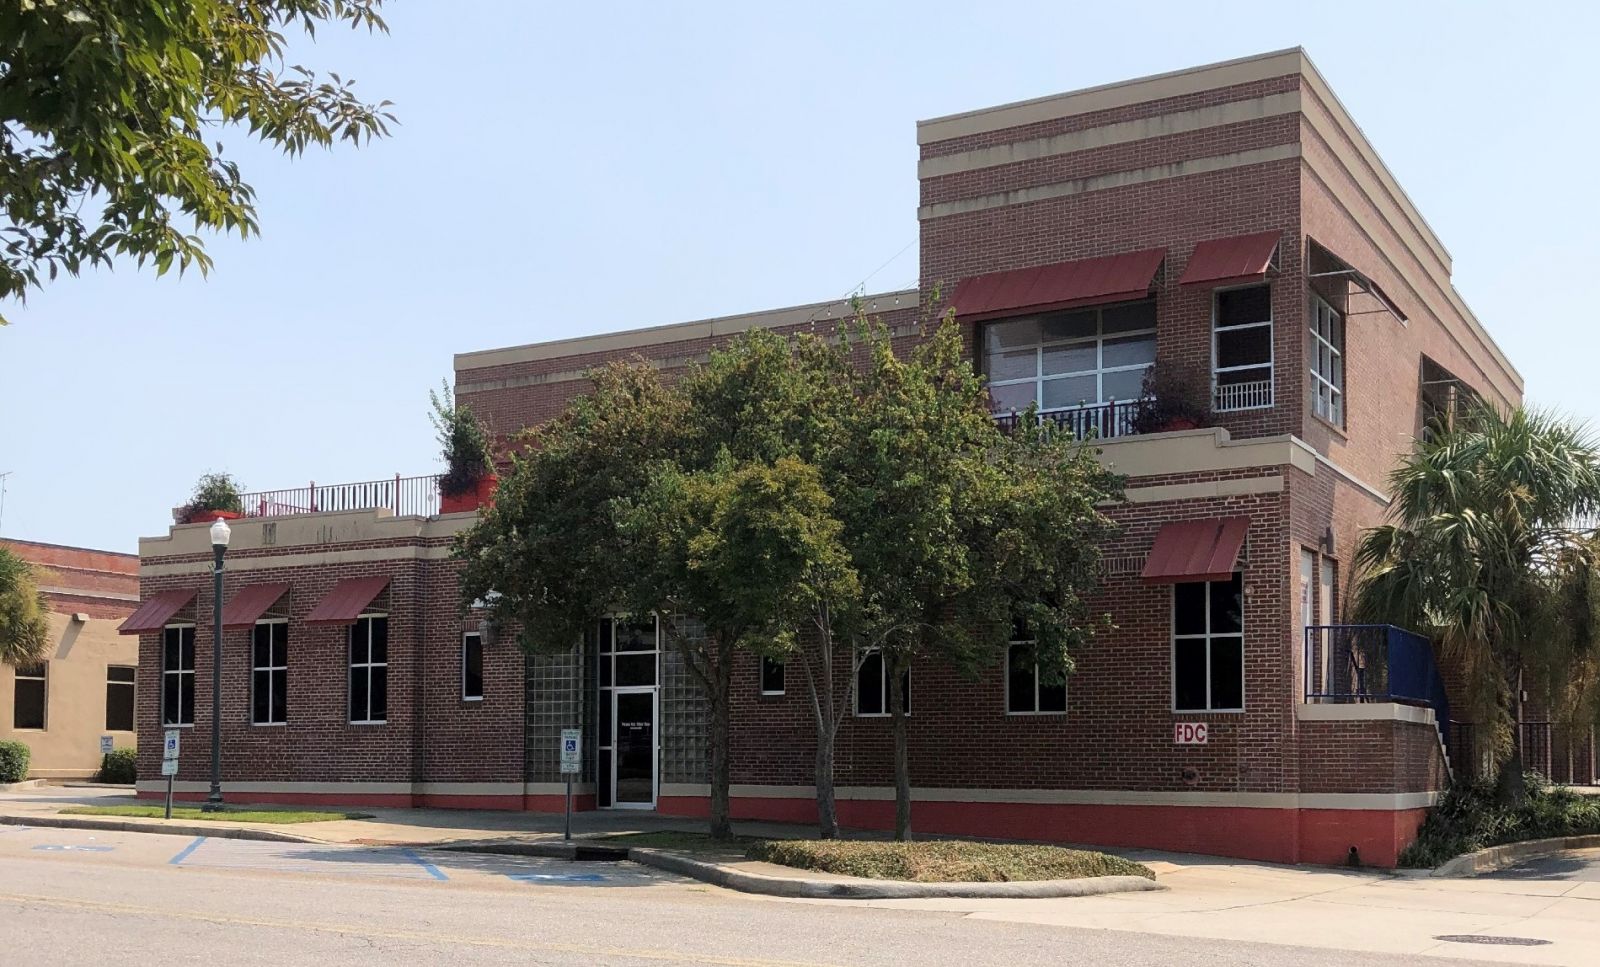 Resource Financial Services has acquired 708 Lady St., the former location of Carolina Ale House, to redevelop into its new headquarters. (Photo/Provided)